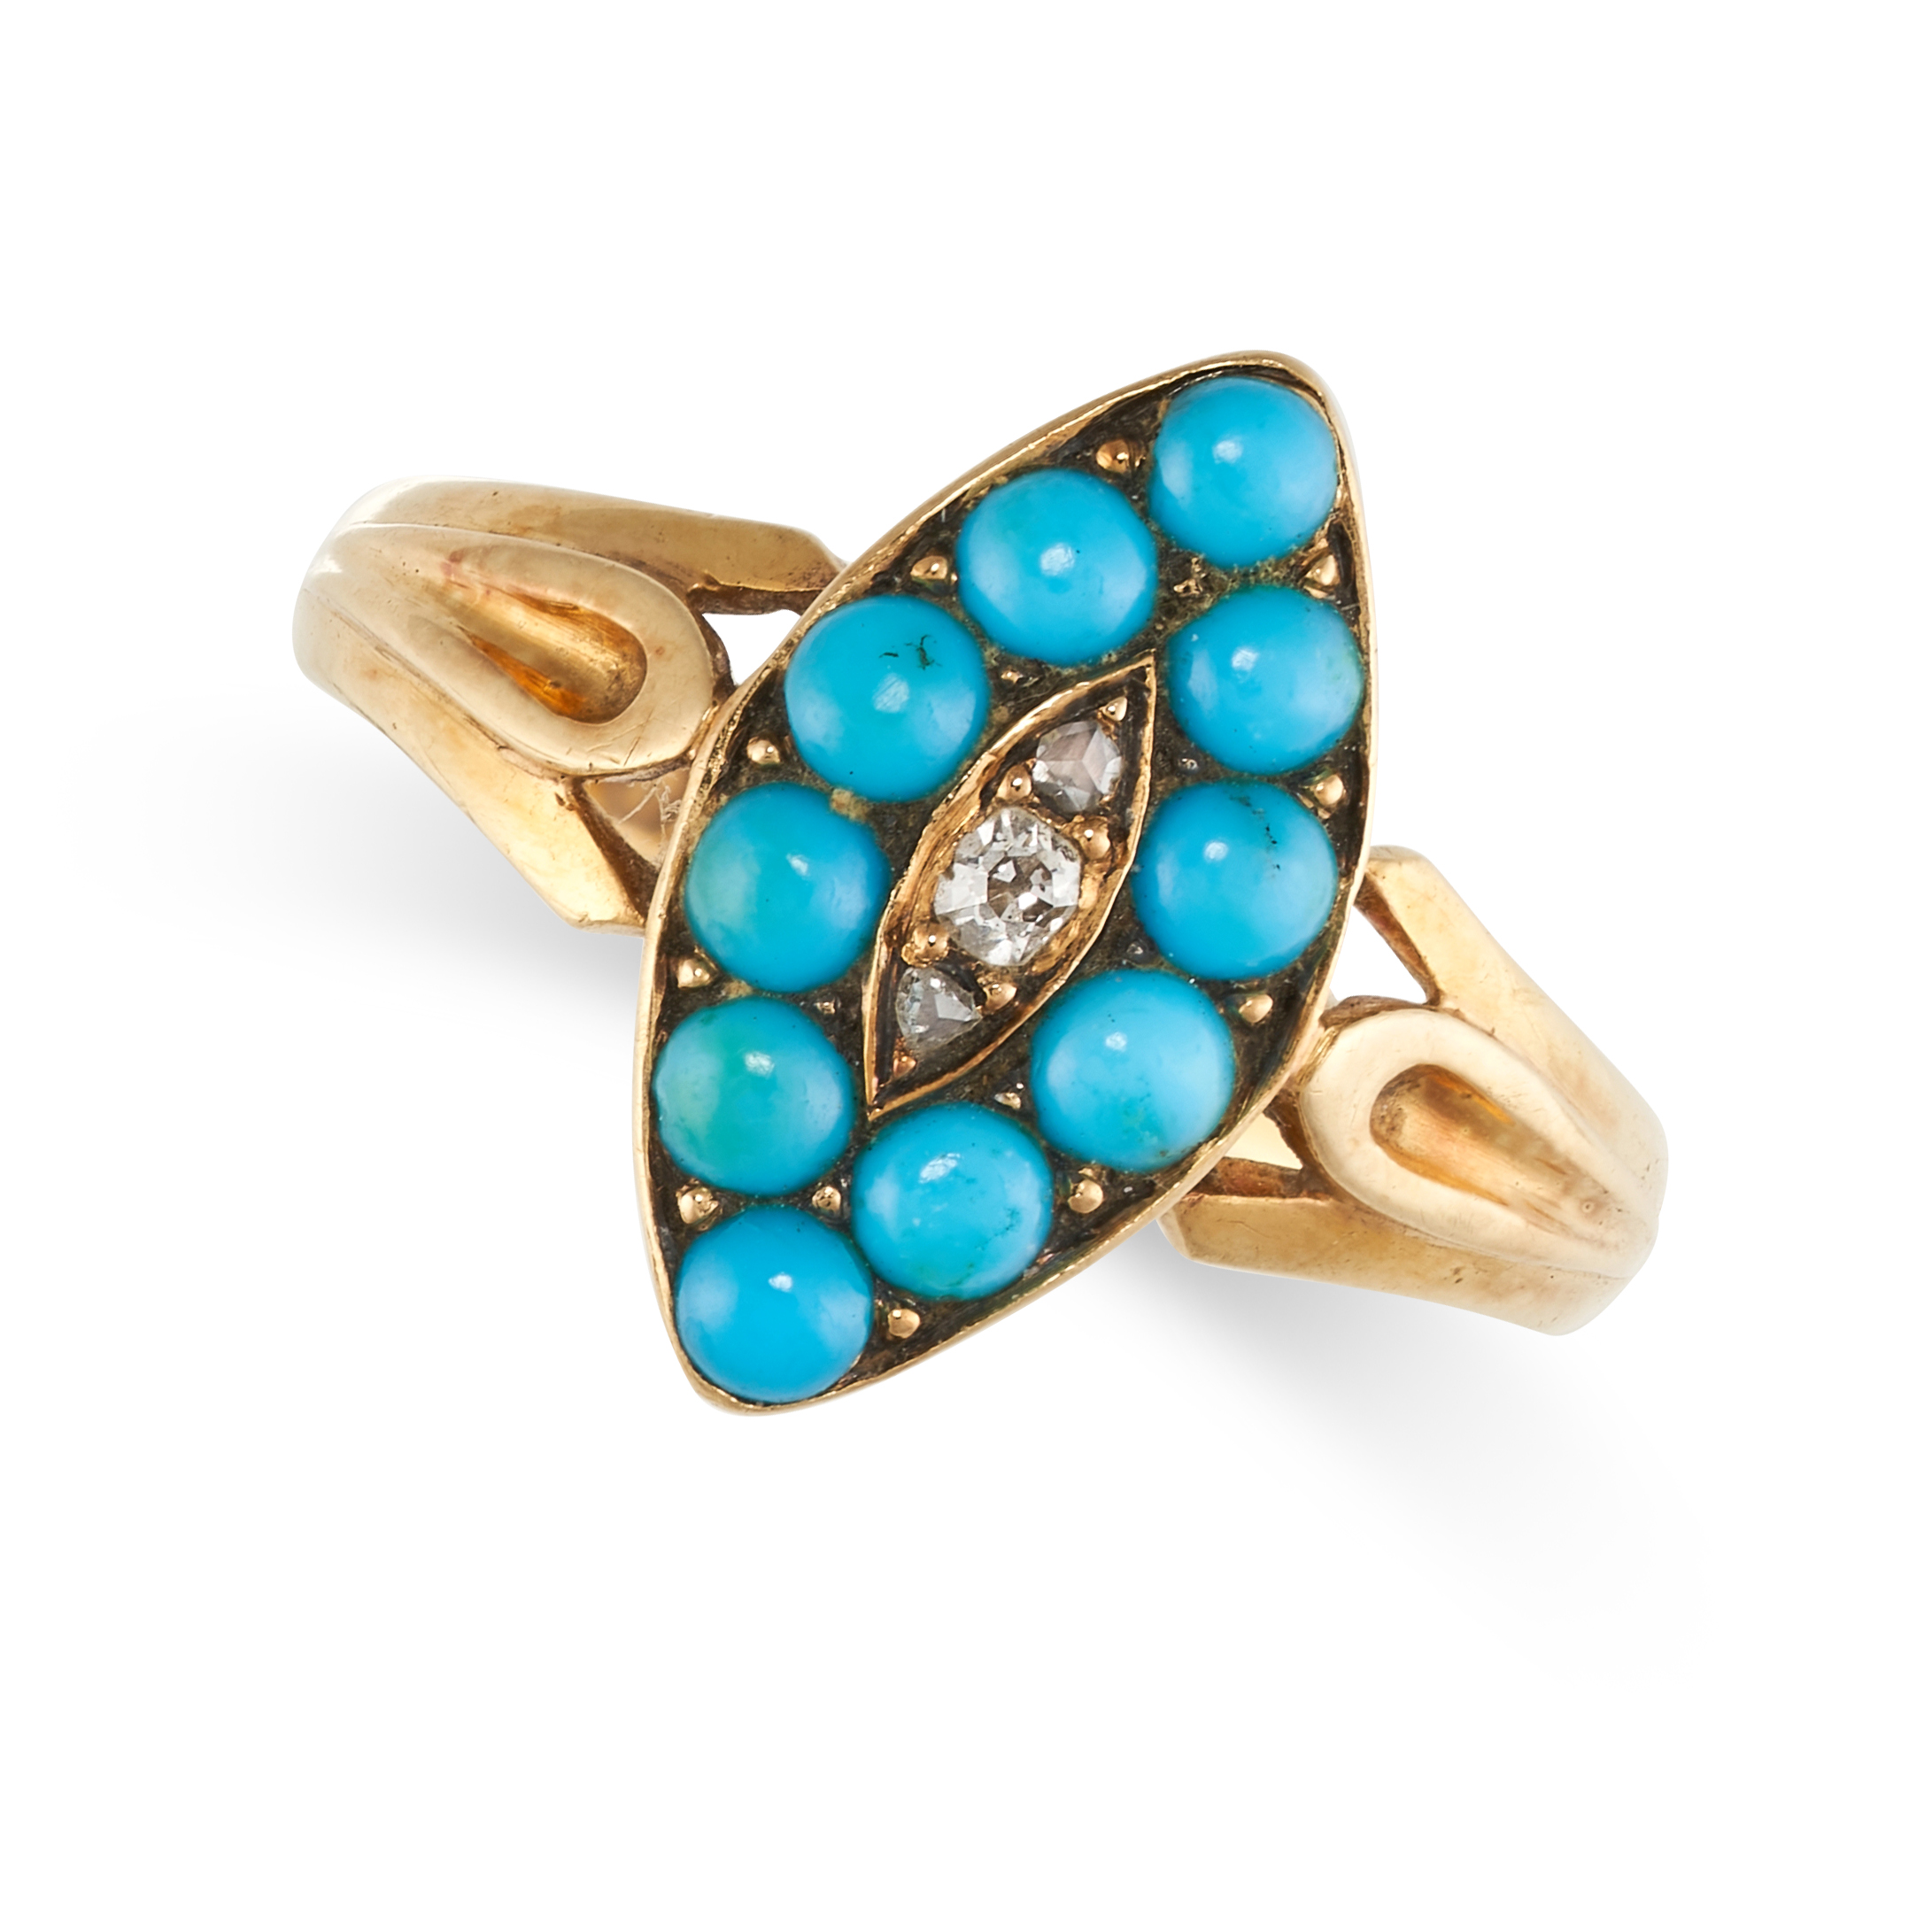 NO RESERVE - AN ANTIQUE VICTORIAN TURQUOISE AND DIAMOND RING, 1890 in 18ct yellow gold, the